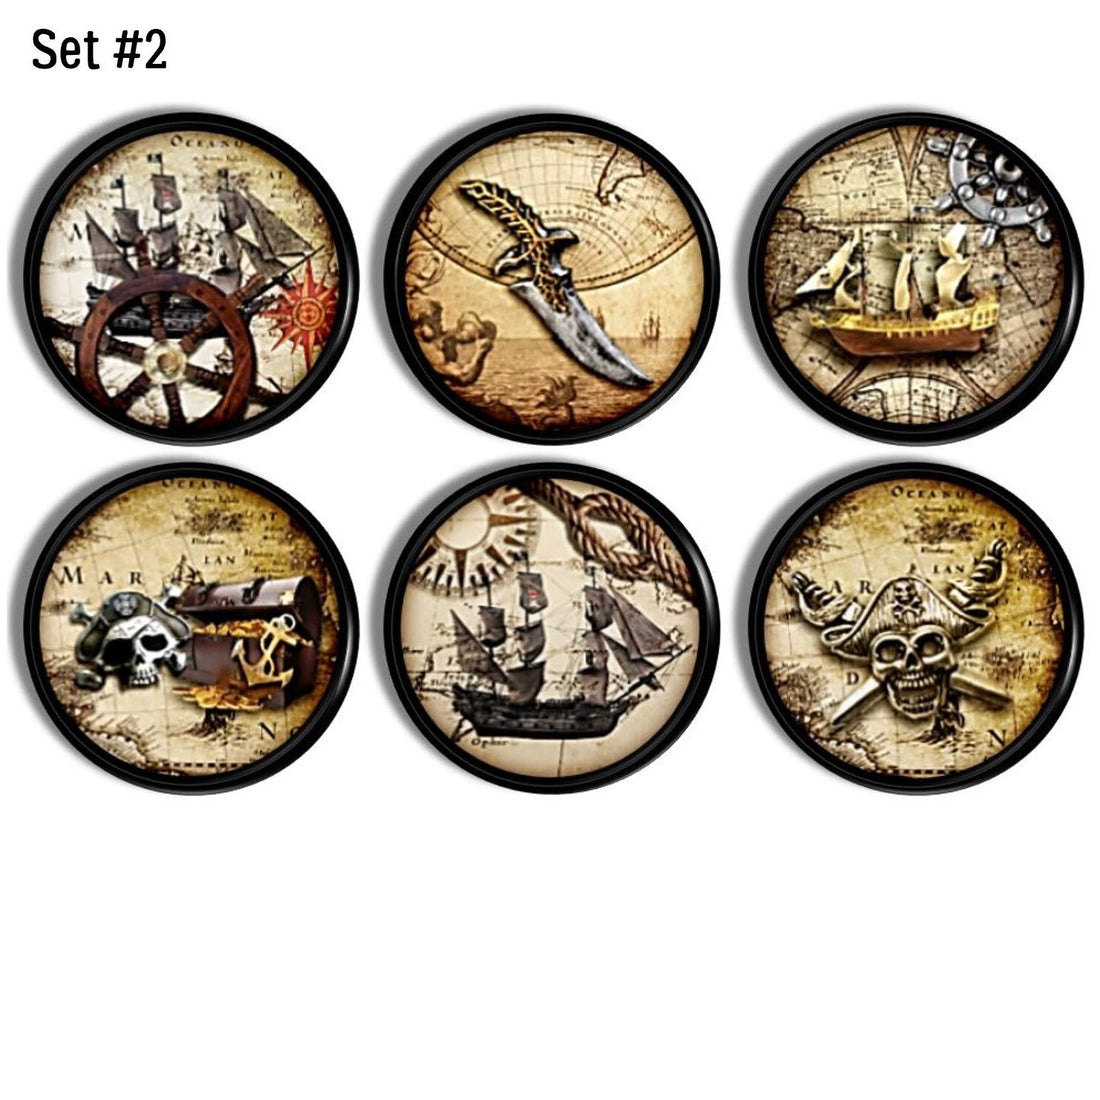 Men's nautical office decor decorative furniture drawer pull set. Earthy, rustic pirate treasure map theme with ship wheel, skull, dagger and gold on black hardware.